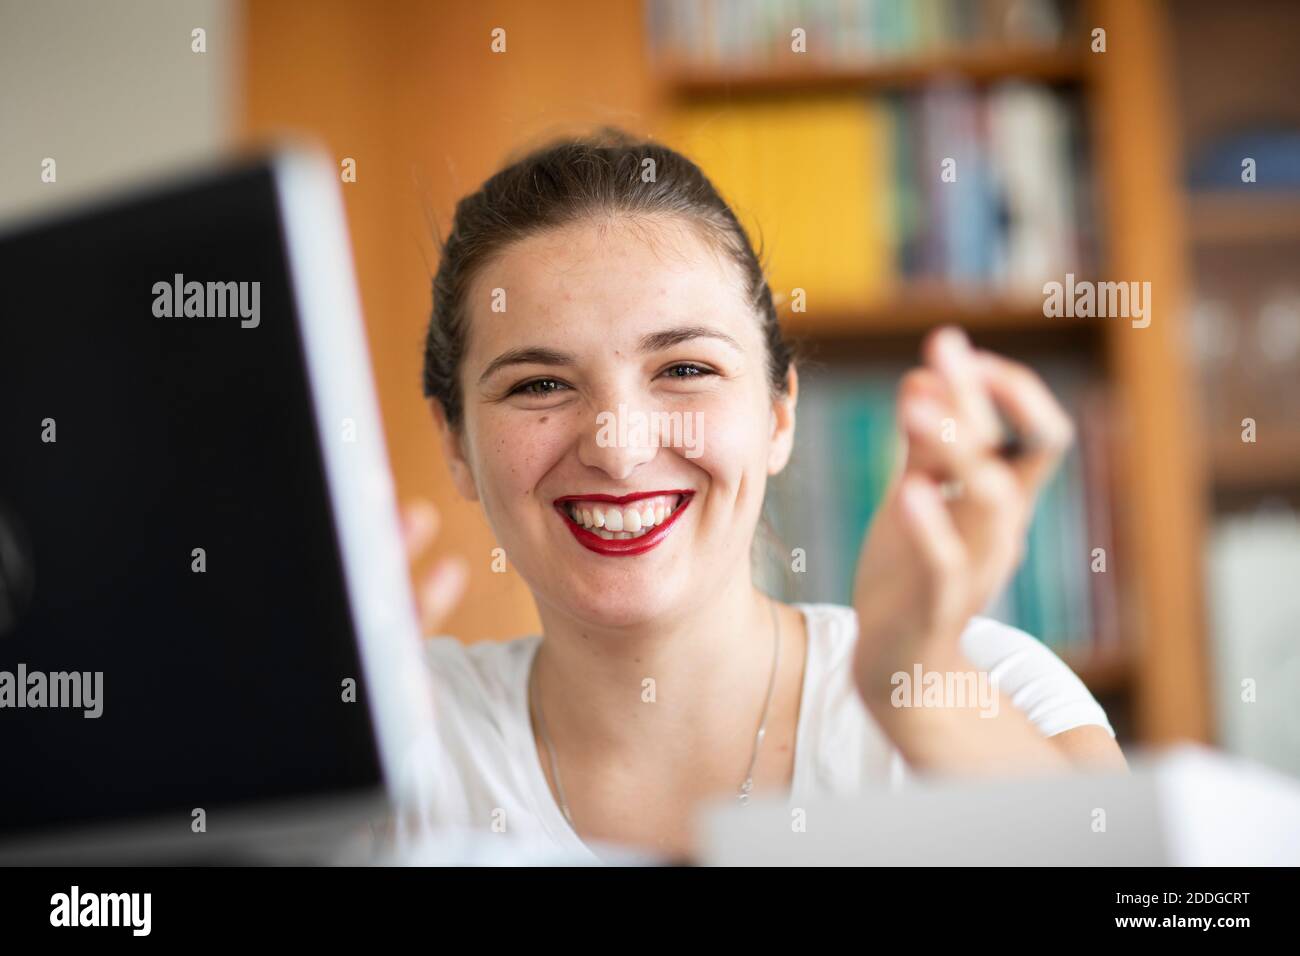 Young woman at computer in library, smiling Stock Photo